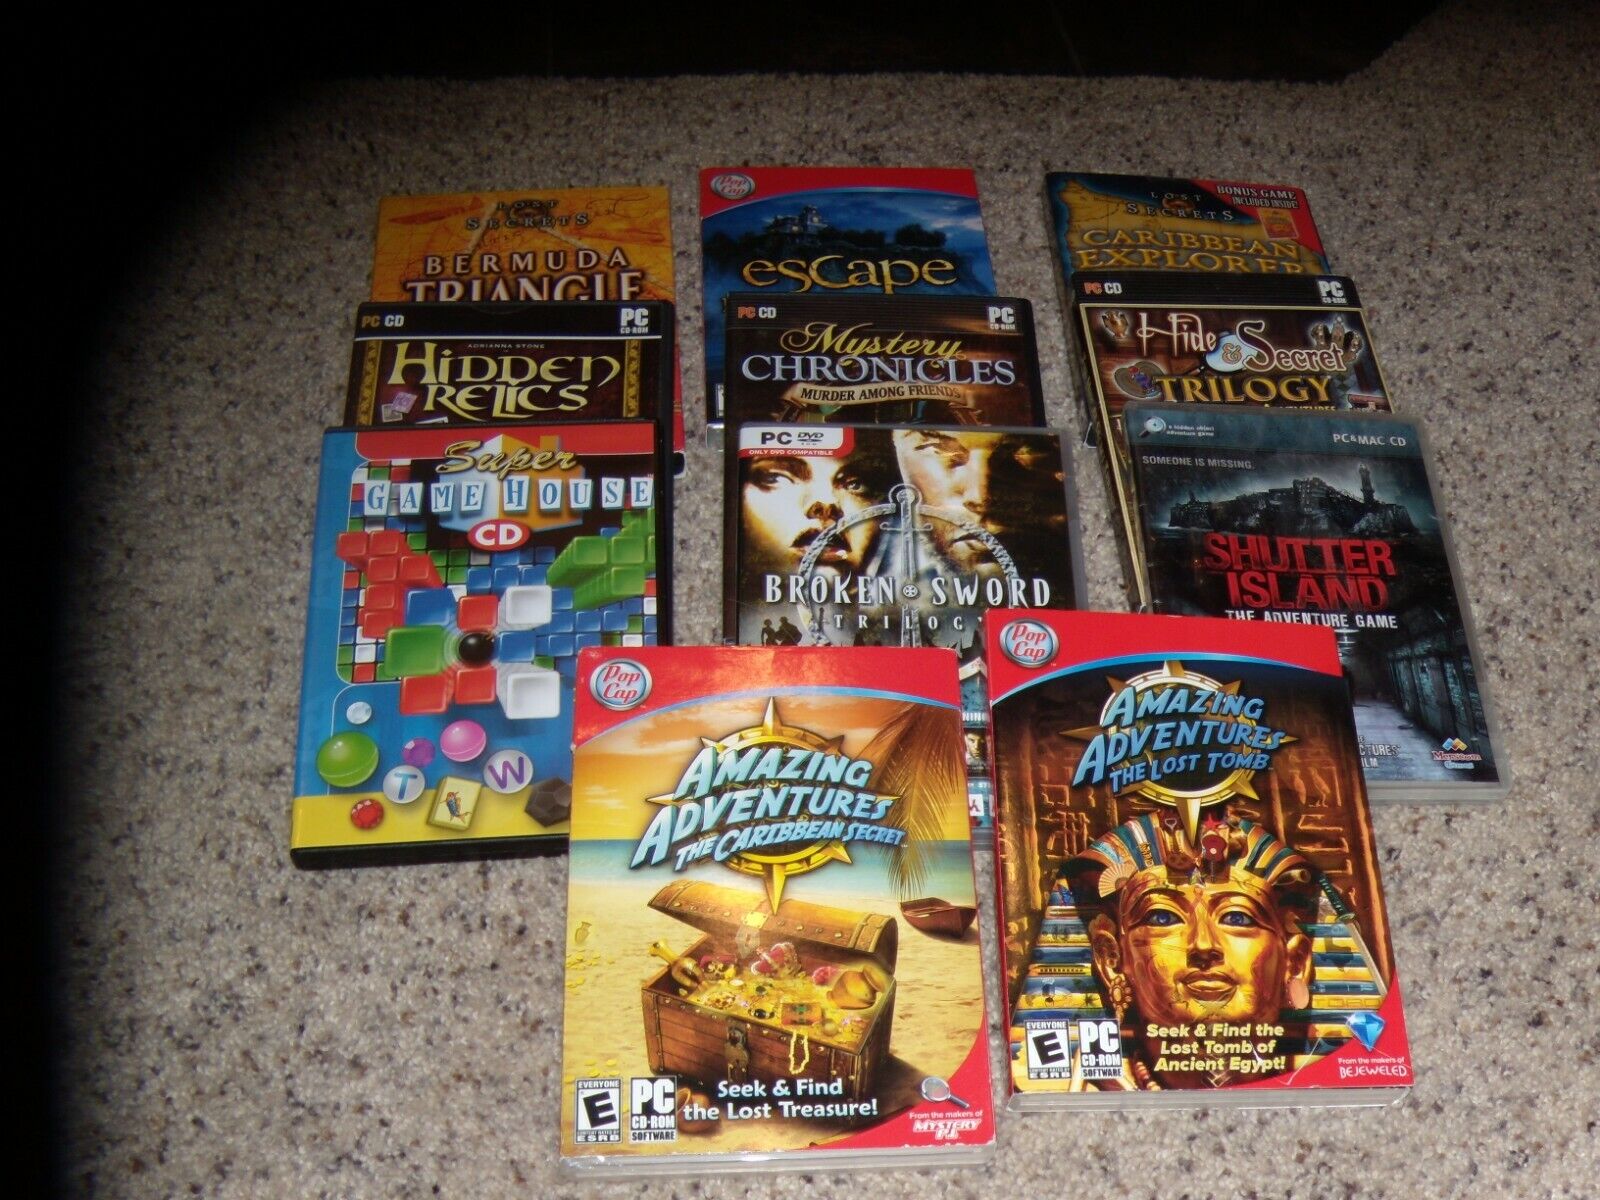 Lot of 11 PC Games - Please see picture and item description for games included